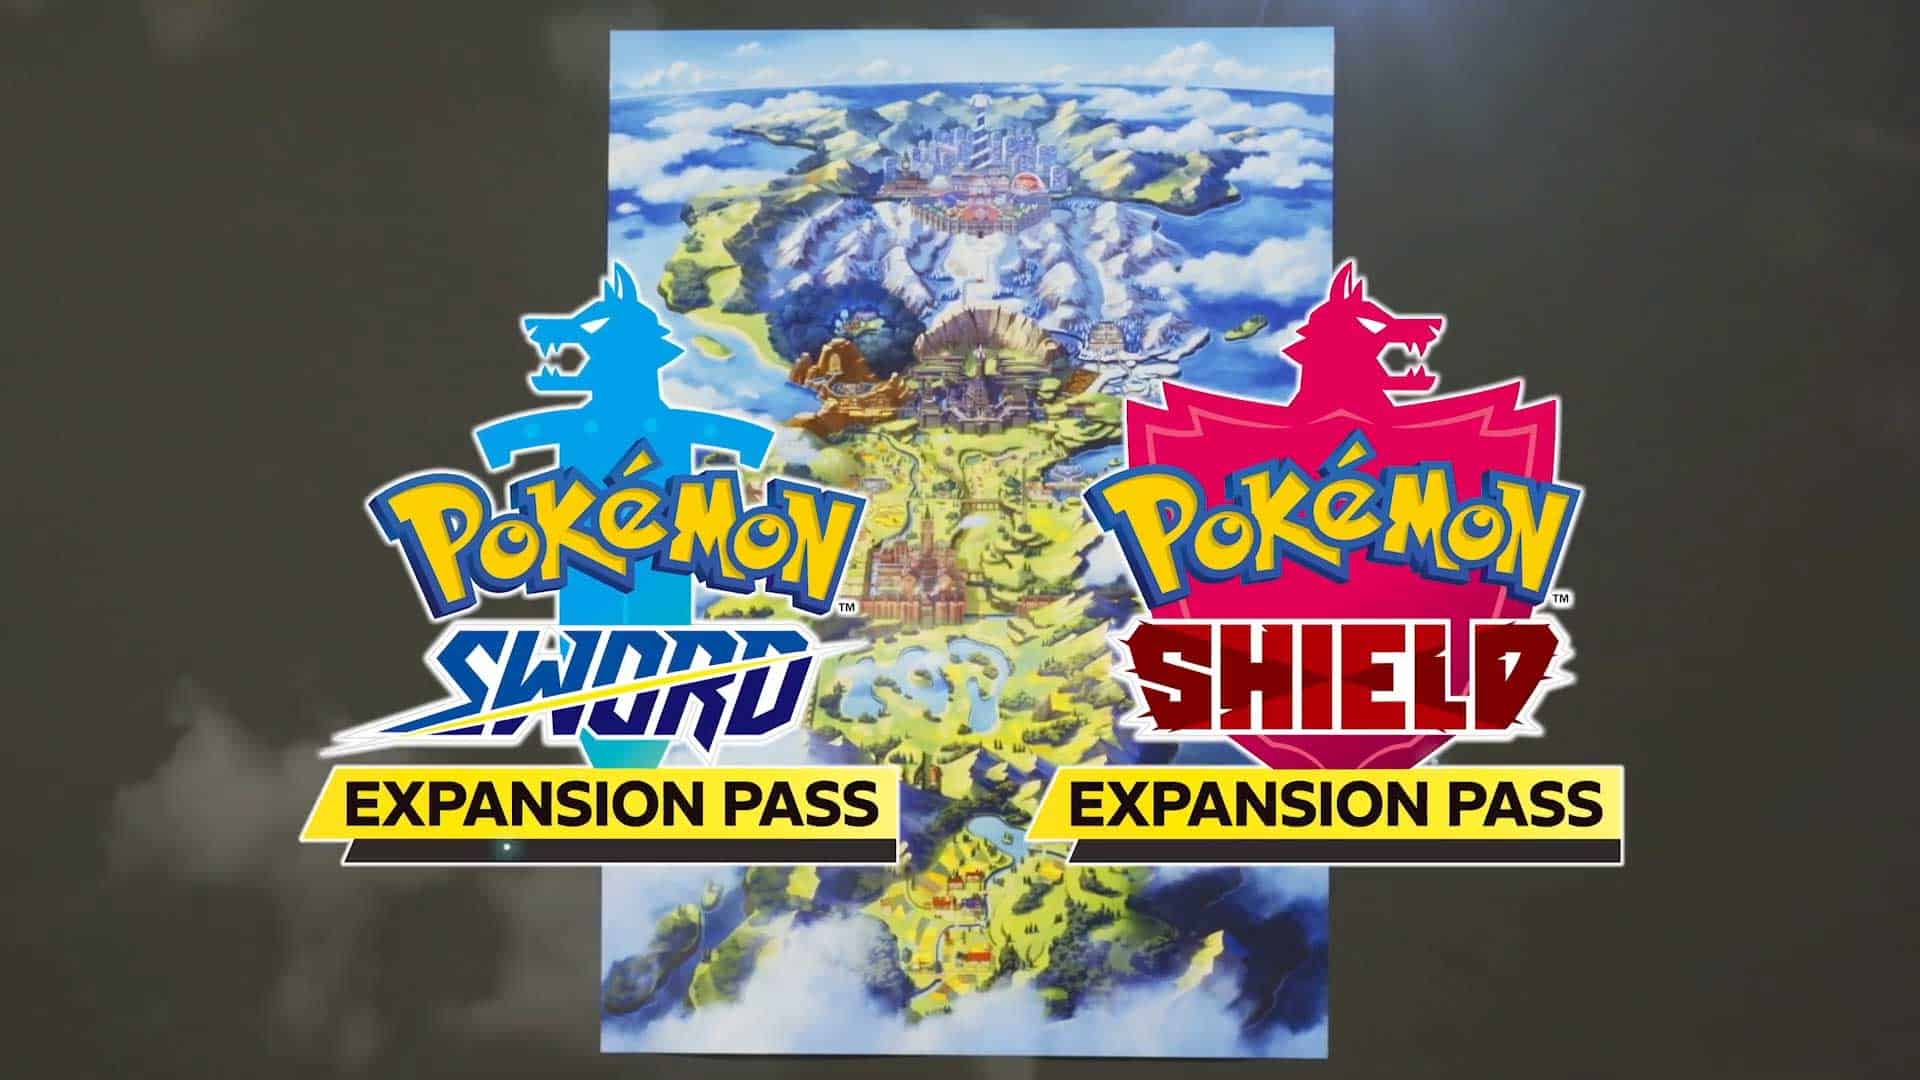 Pokemon Sword and Shield: Isle of Armor Expansion Release Date, New Details Revealed